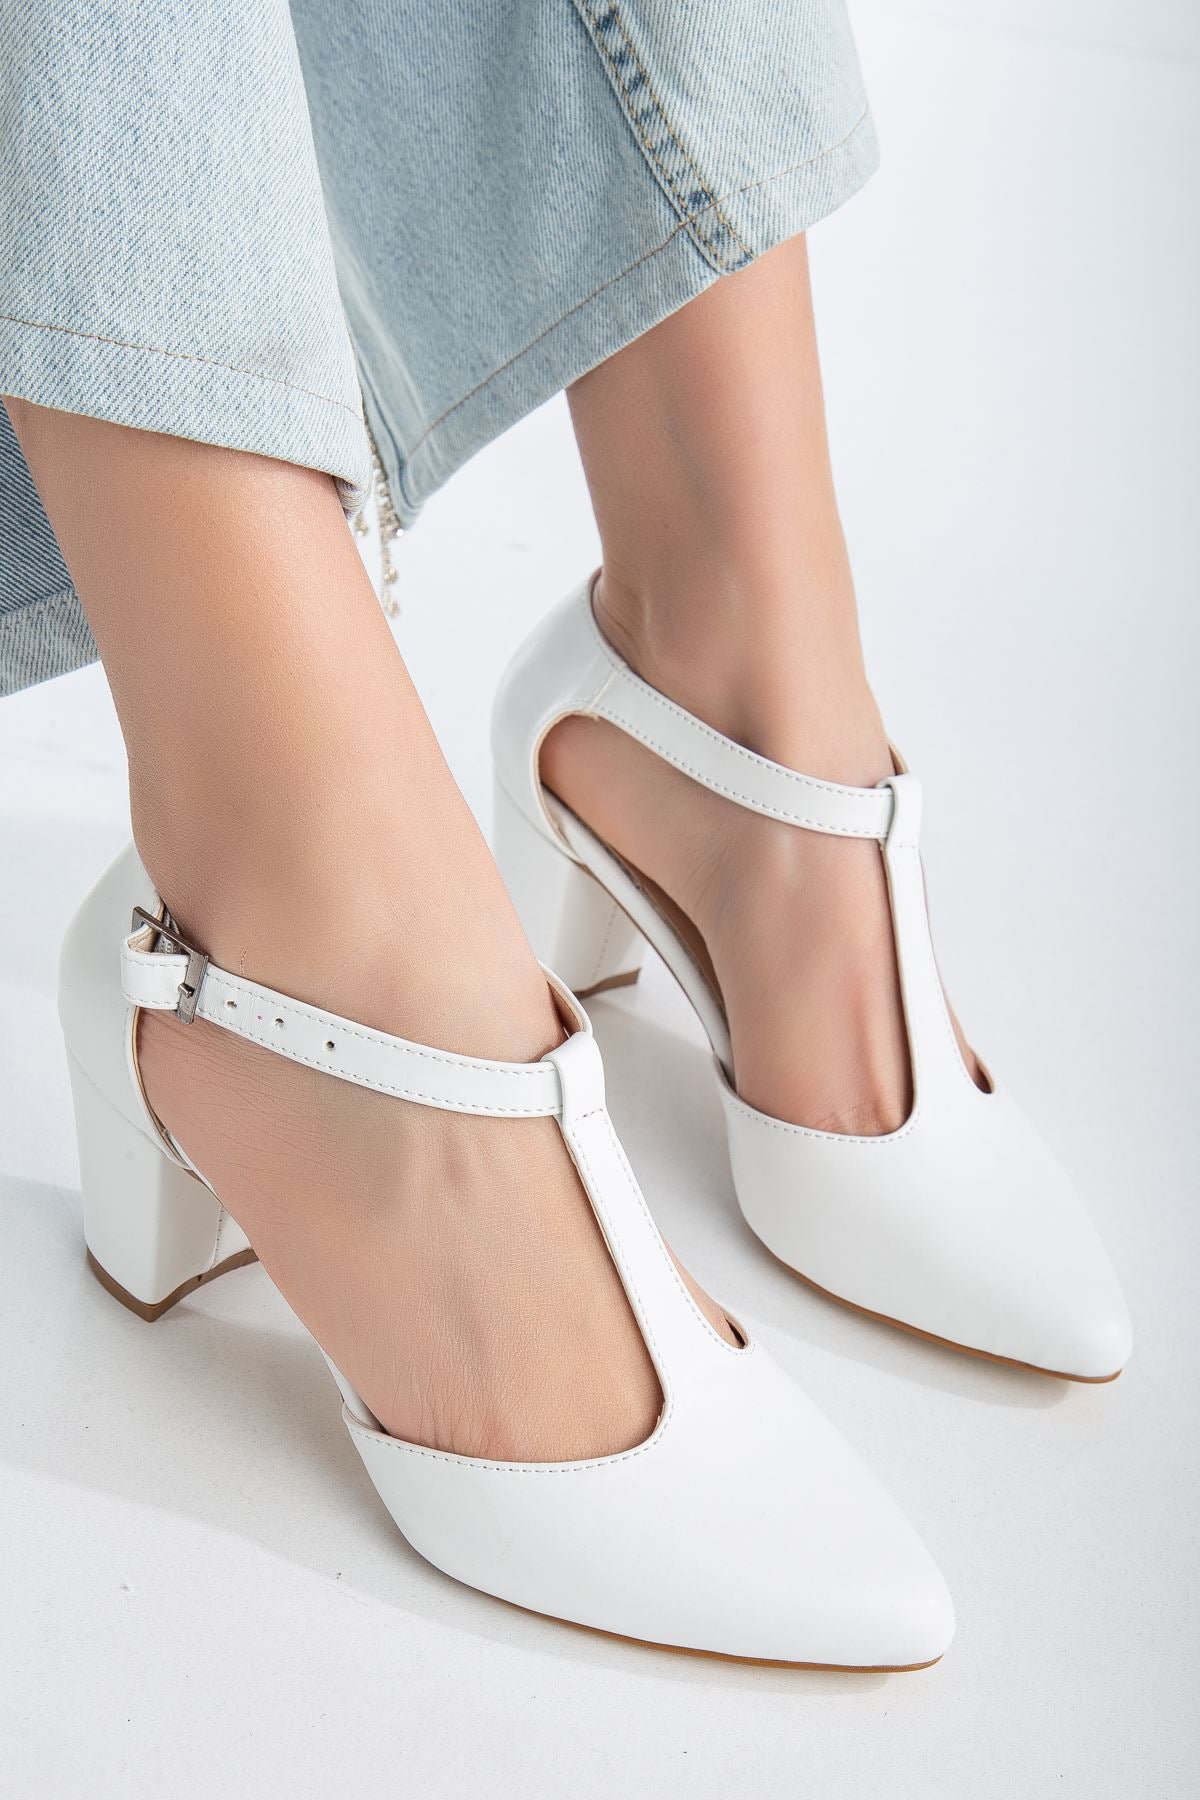 Niven White Leather Heeled Women's Shoes - STREETMODE™